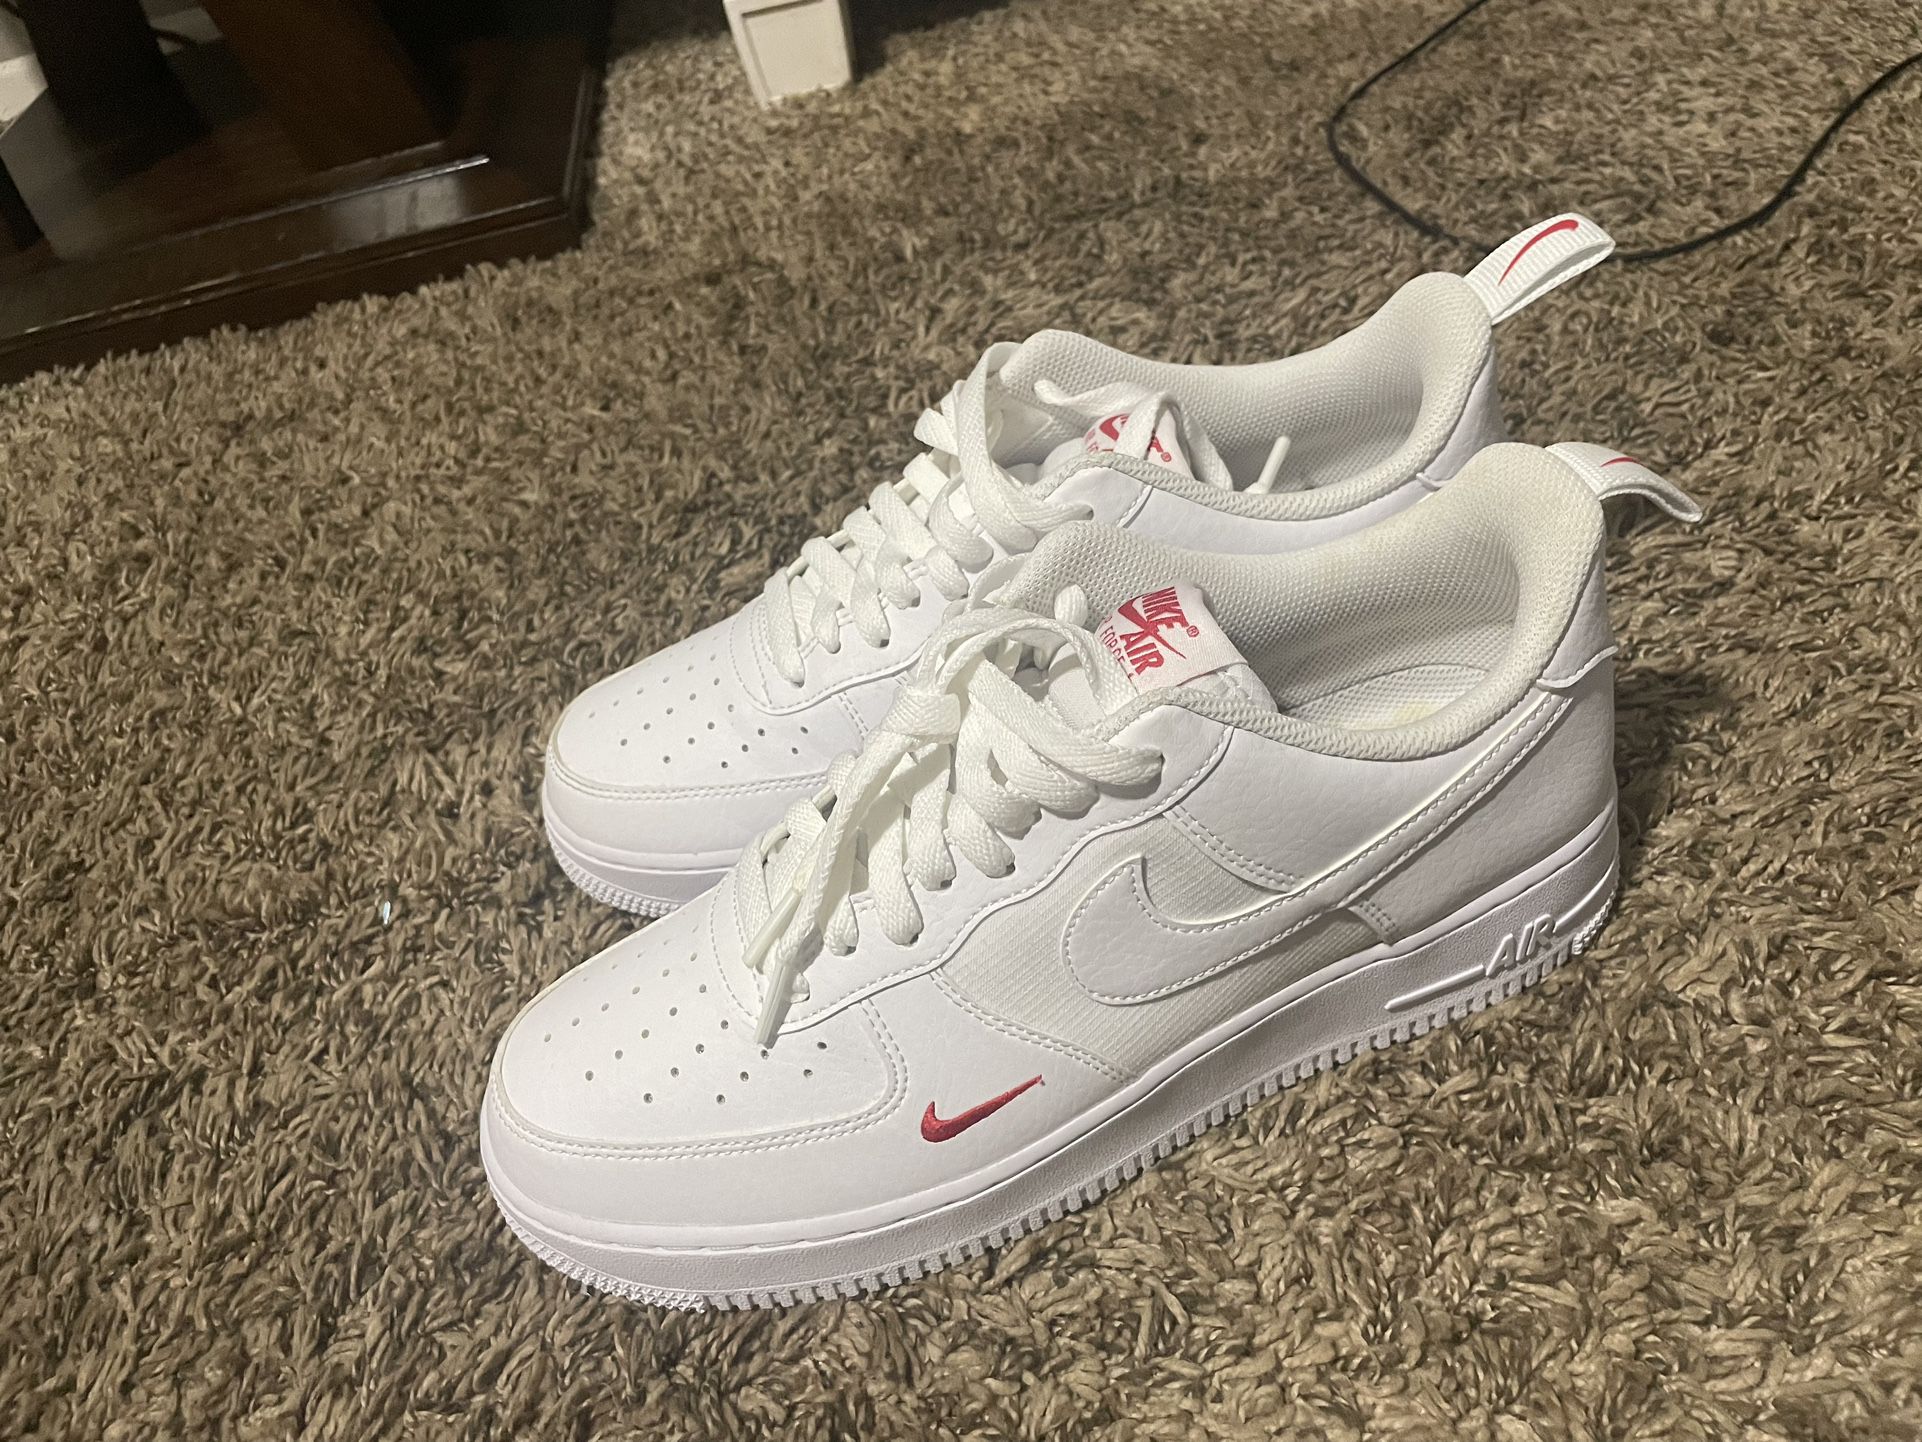 120 OBO Nike Air Forces Worn Once 